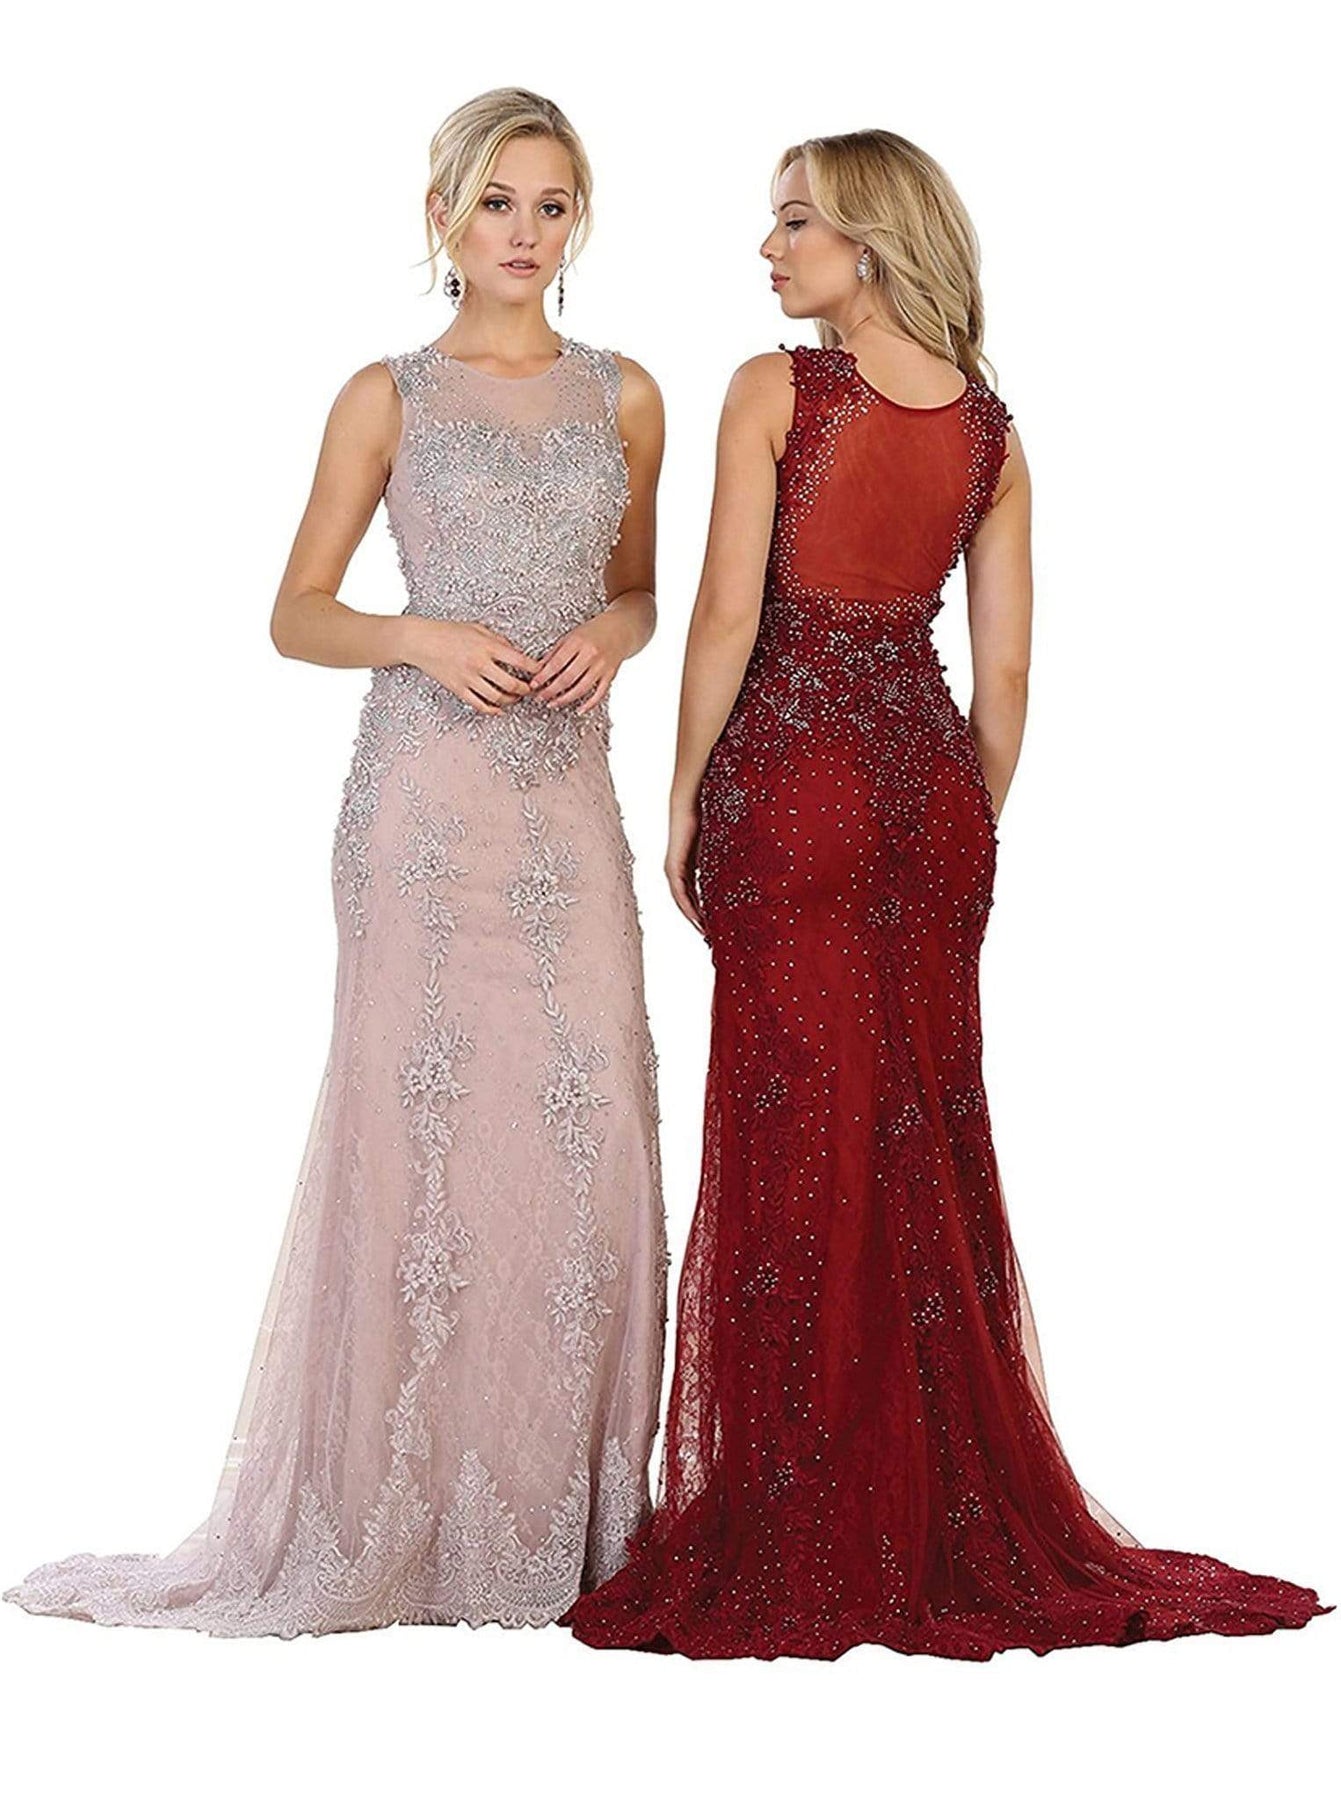 May Queen - RQ7551 Embellished Illusion Jewel Sheath Prom Gown Special Occasion Dress 4 / Burgundy